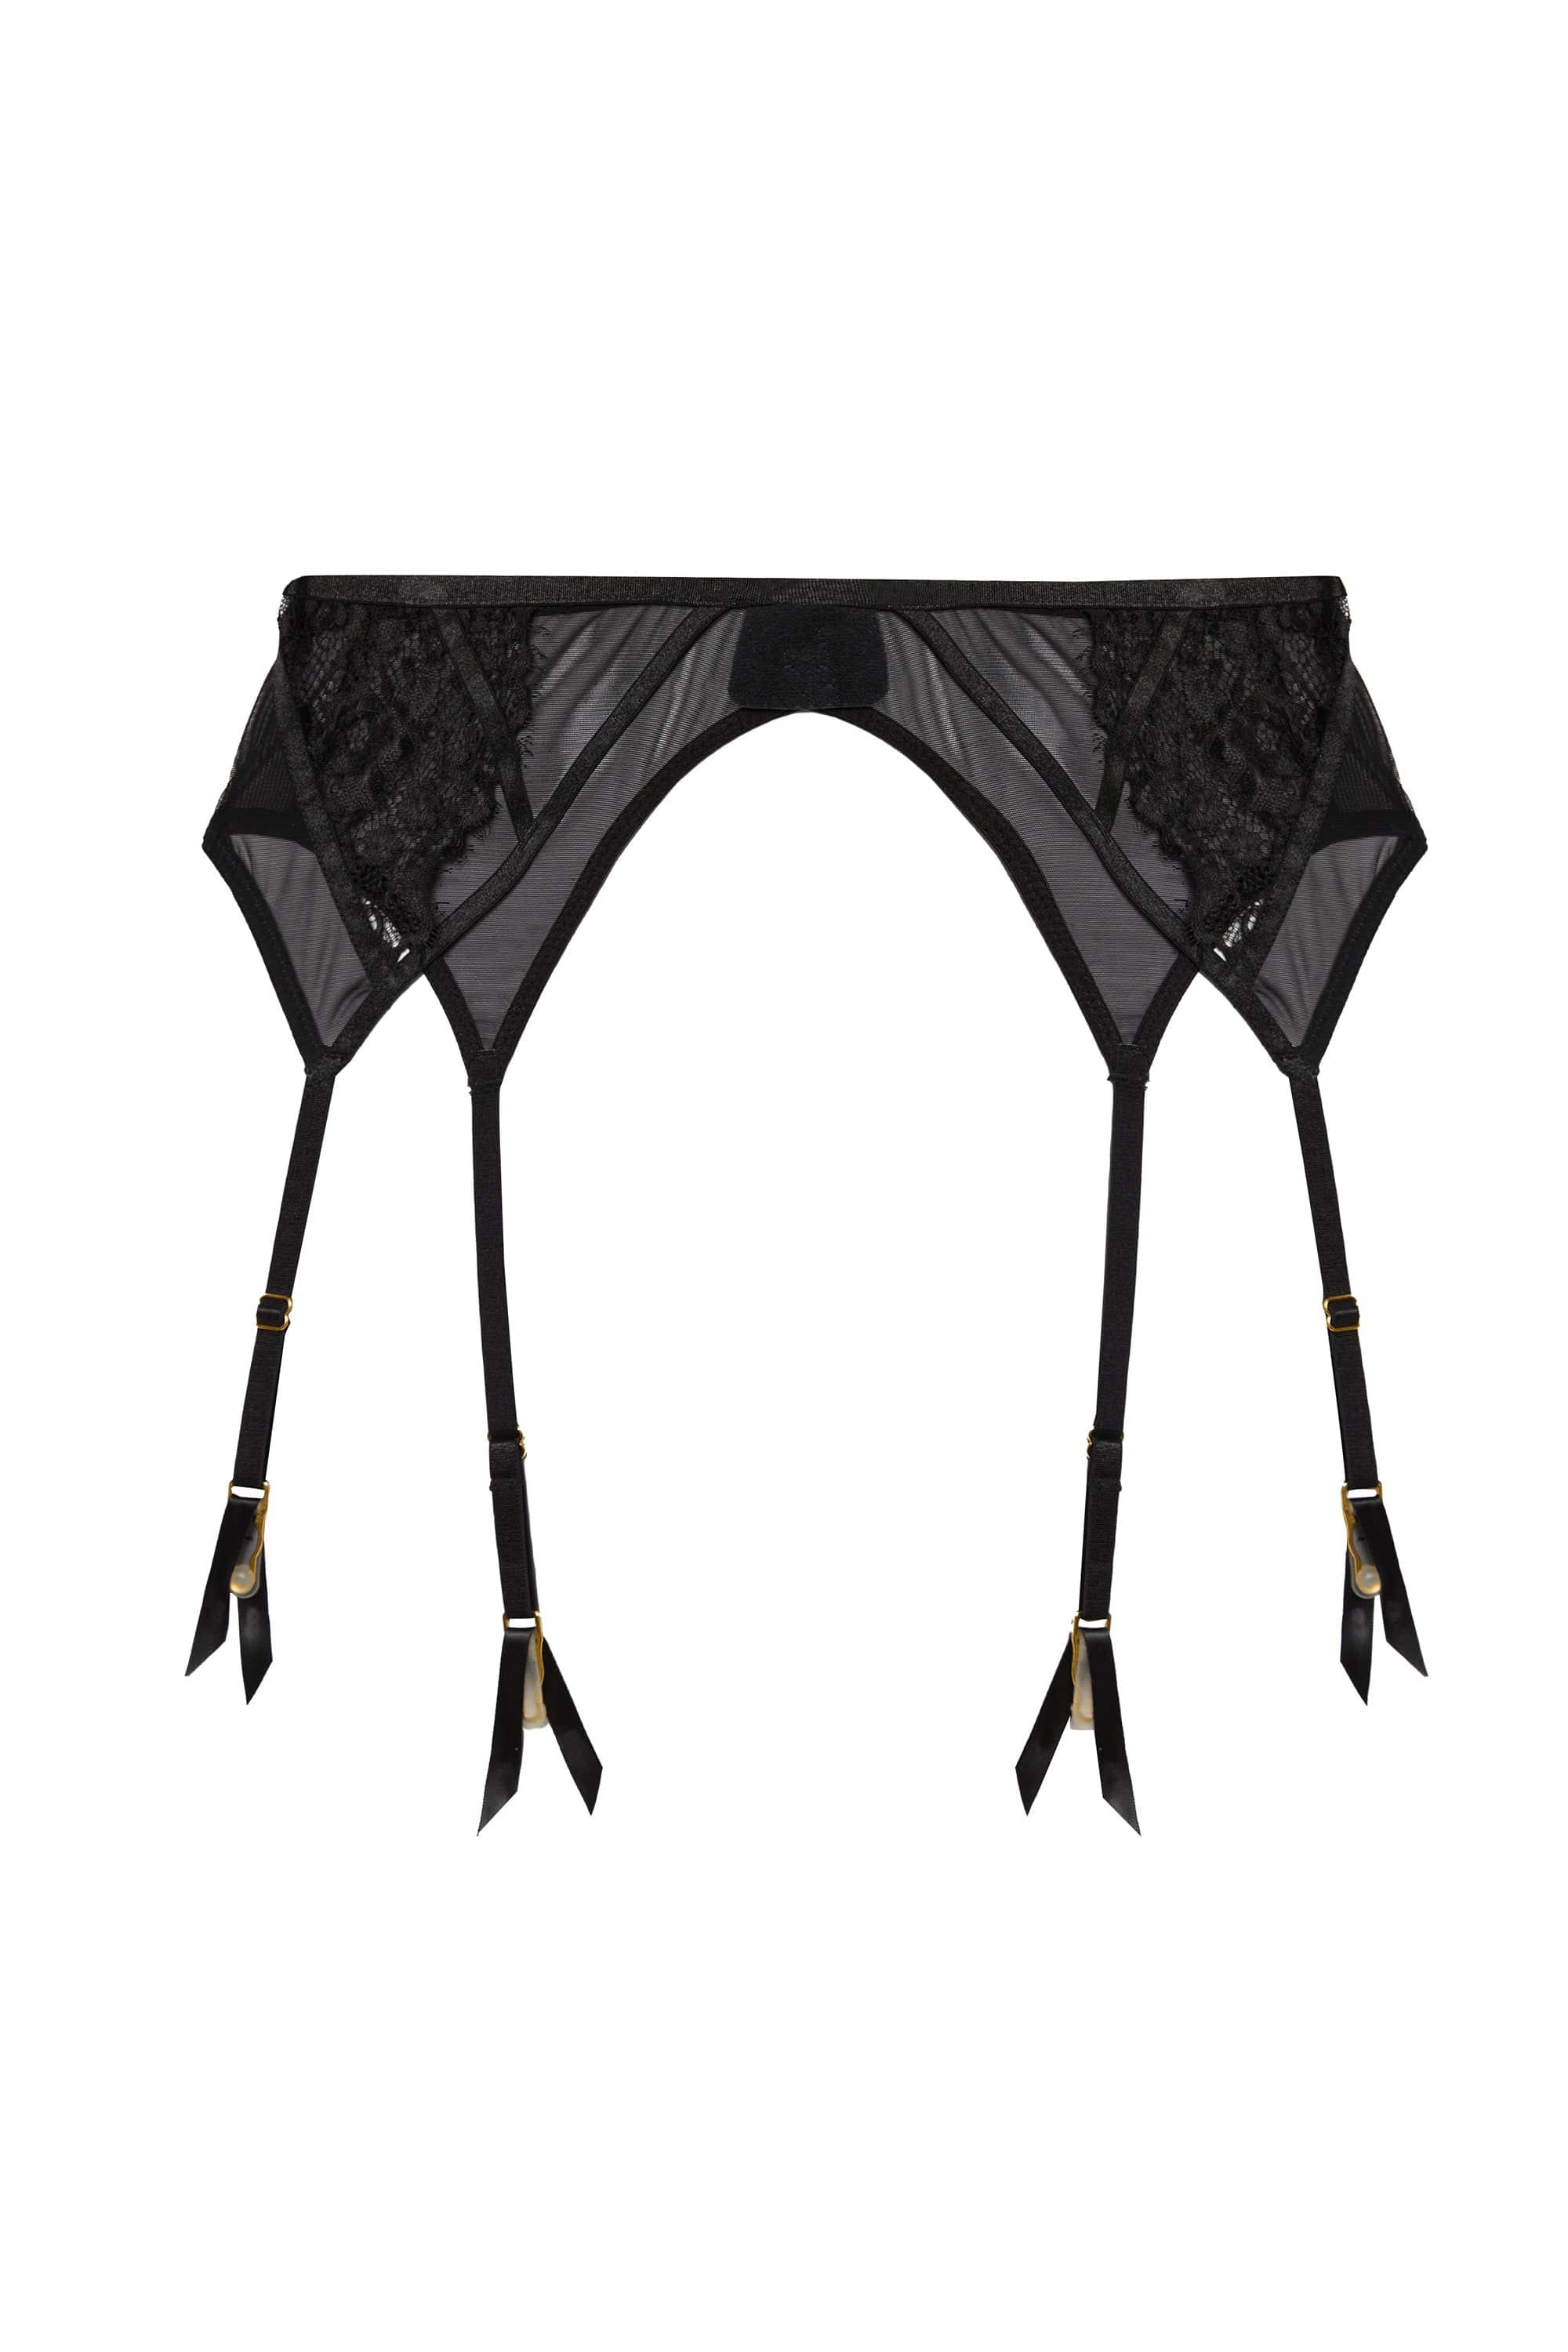 Kennedy Black Cut Out Mesh and Lace Suspender